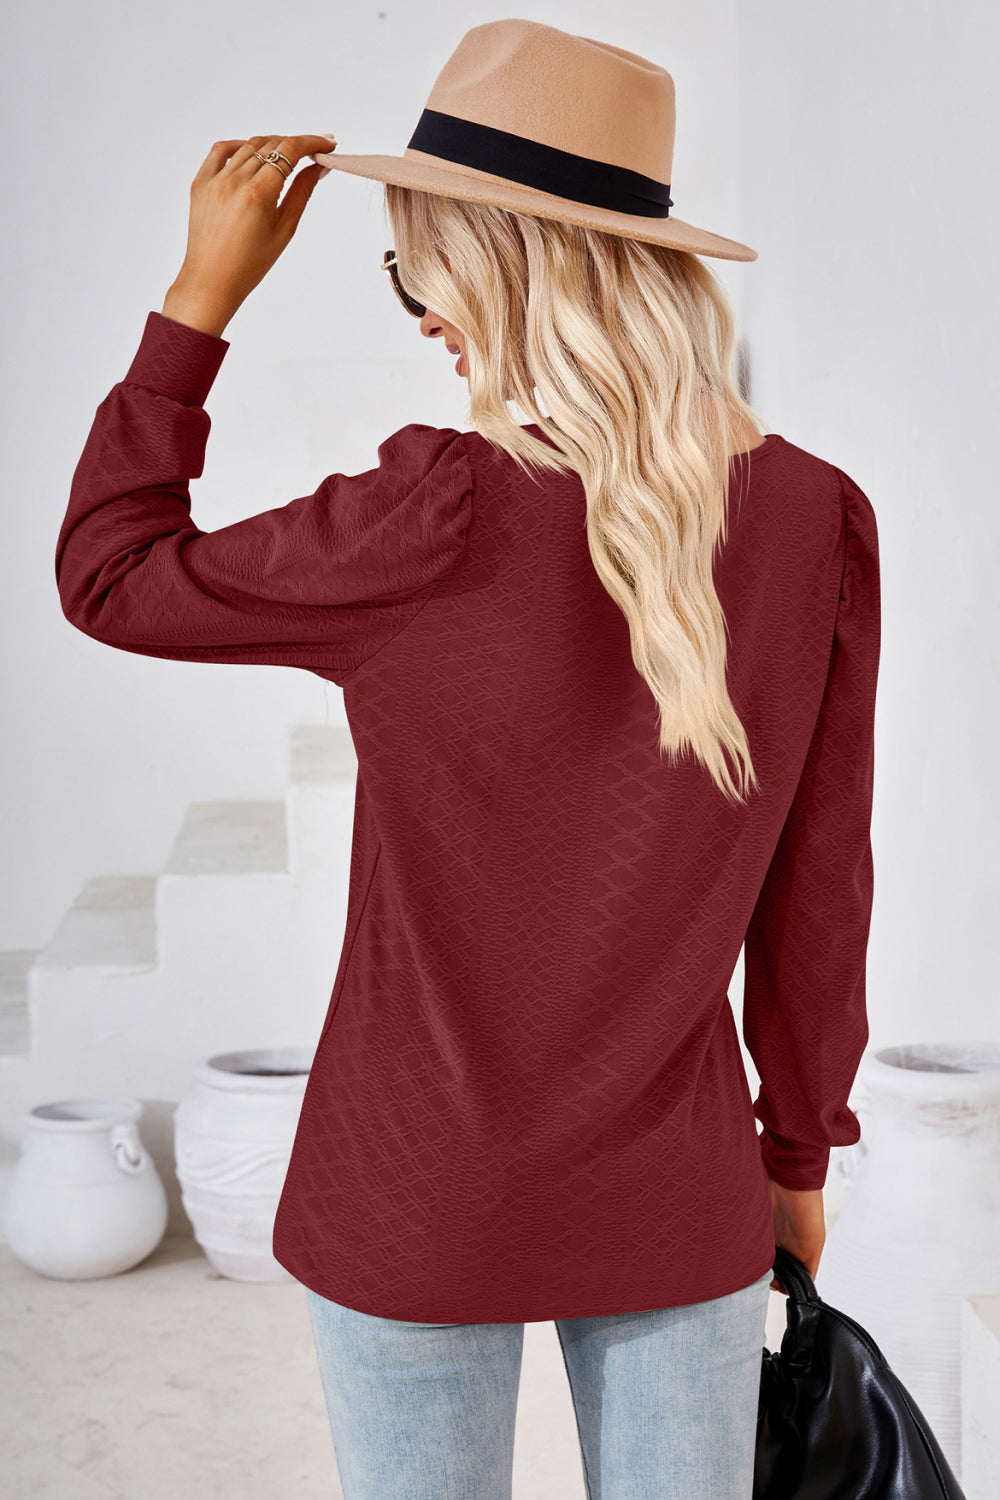 Square Neck Puff Sleeve Blouse - Women’s Clothing & Accessories - Shirts & Tops - 17 - 2024